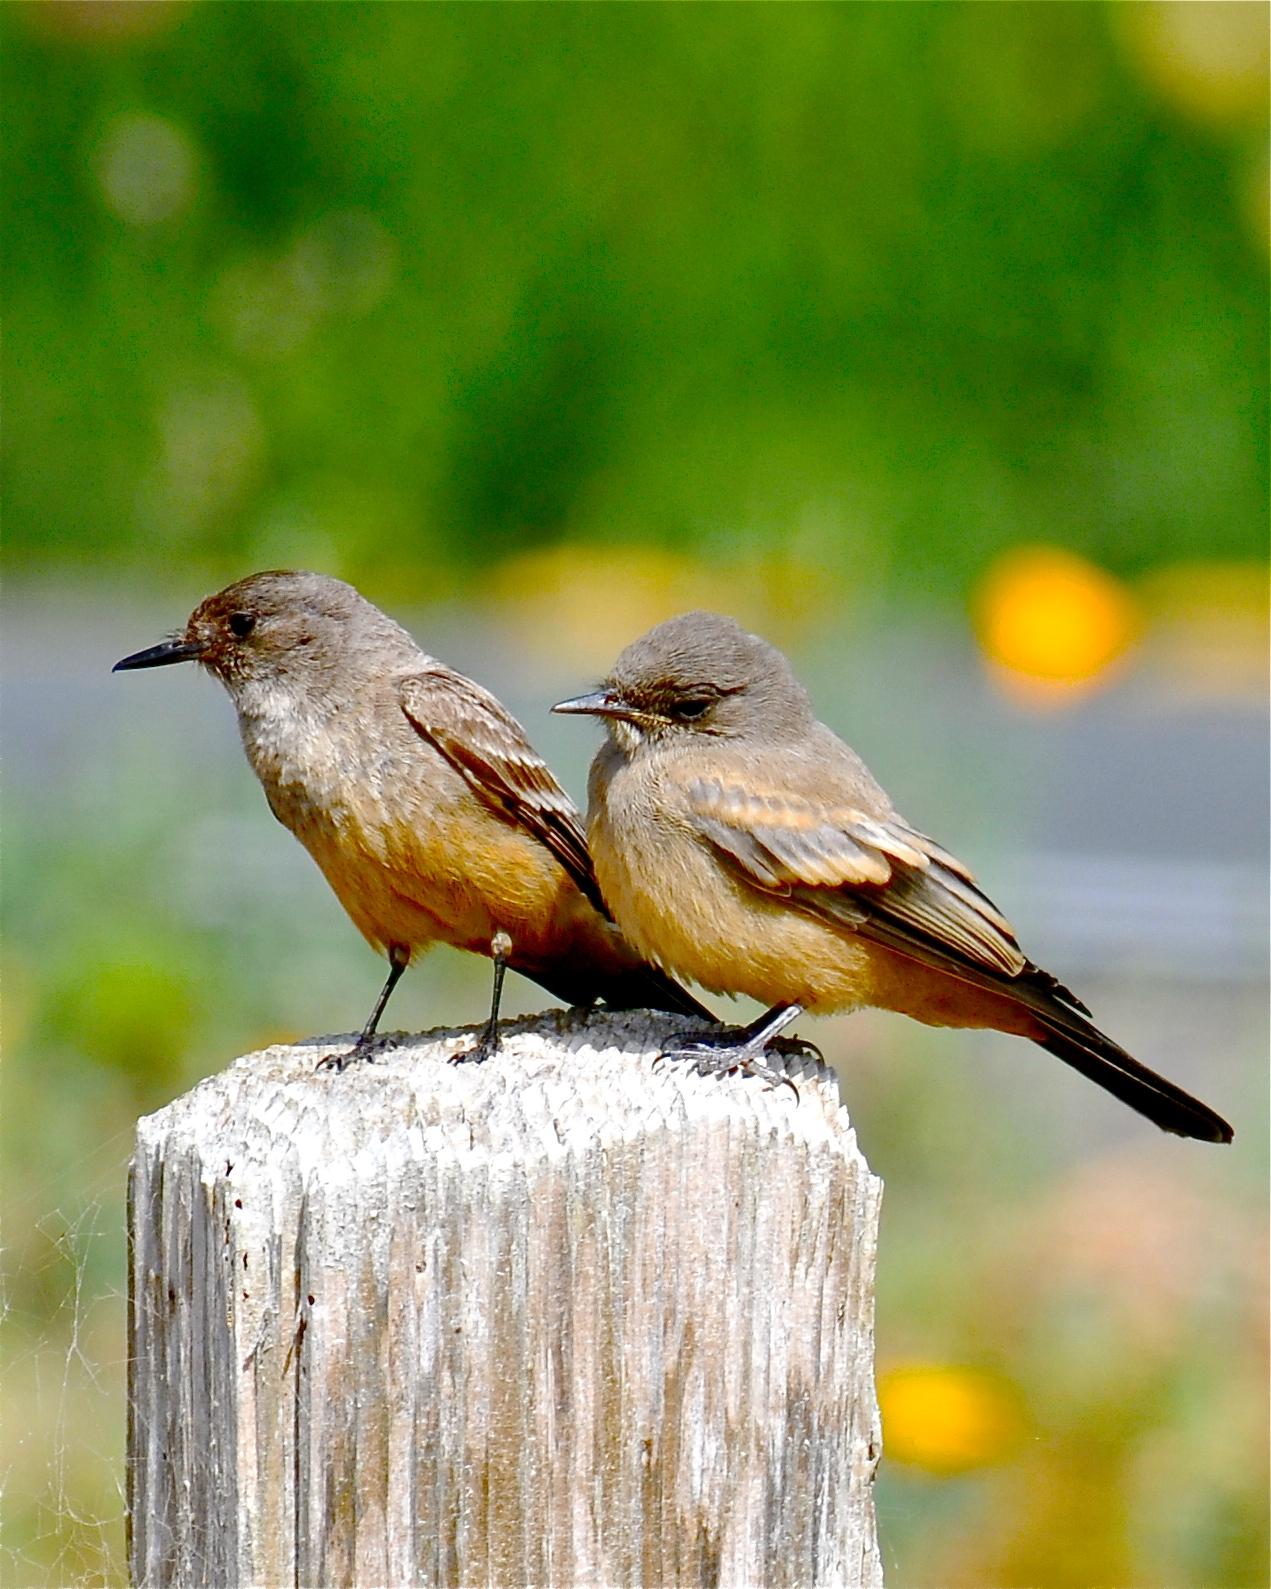 Say's Phoebe Photo by Gerald Friesen